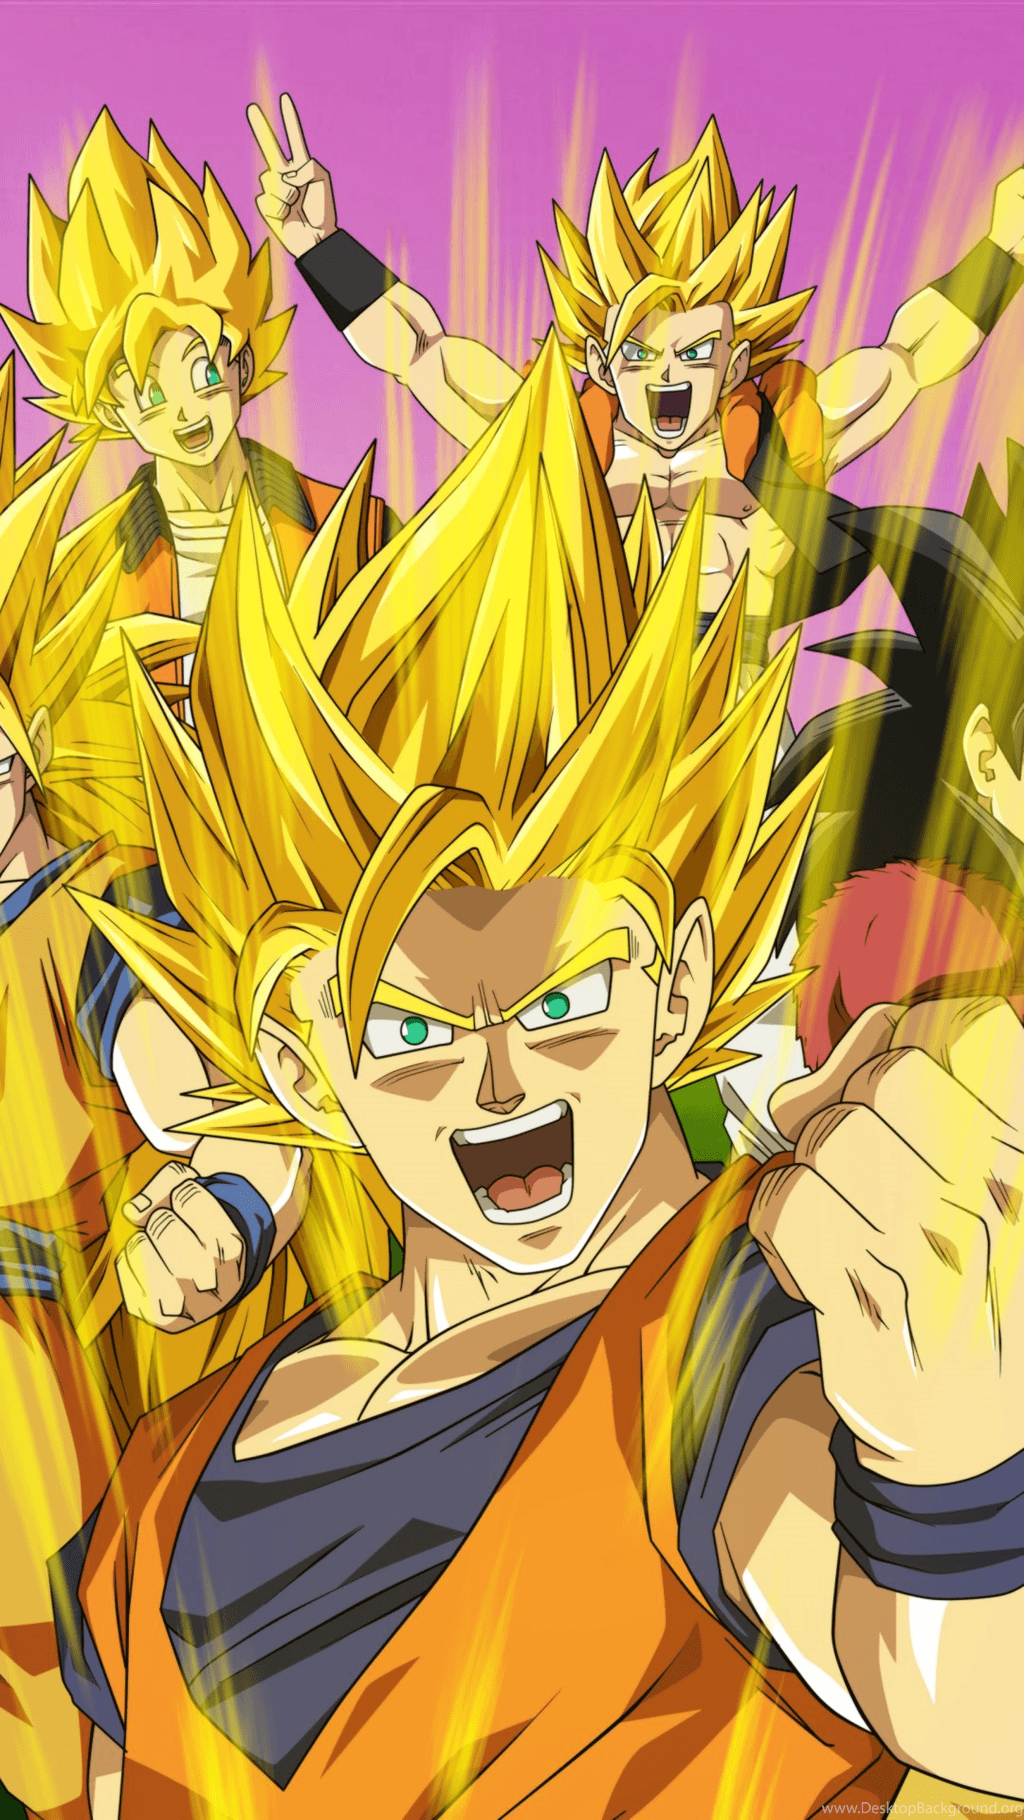 Dragon Ball Z Iphone 6 Plus Wallpapers Top Free Dragon Ball Z Iphone 6 Plus Backgrounds Wallpaperaccess